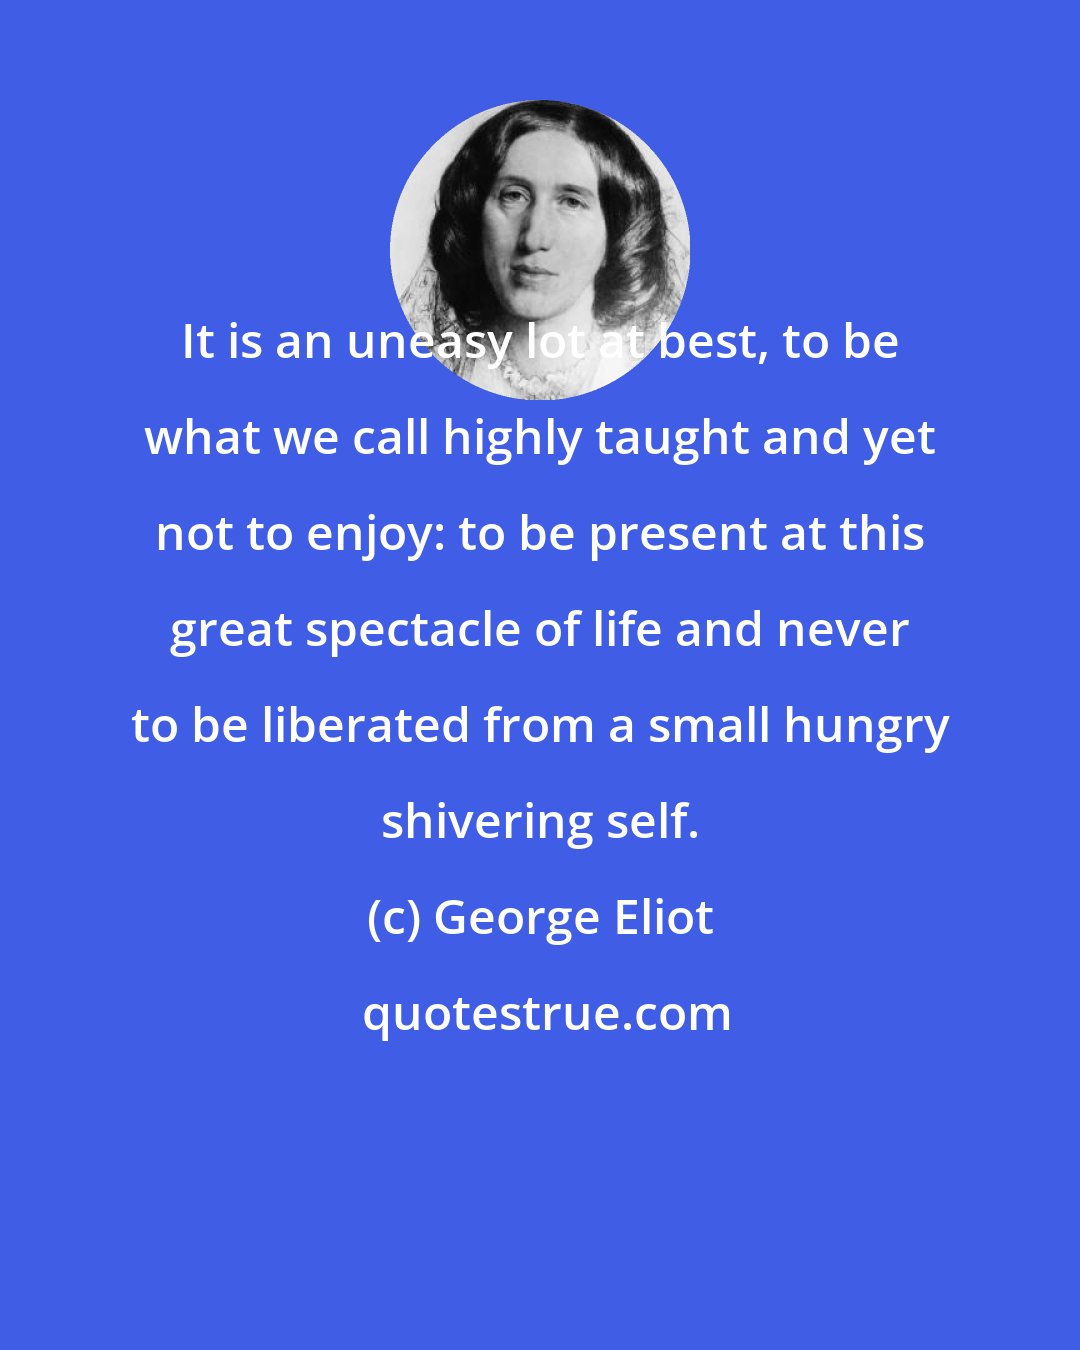 George Eliot: It is an uneasy lot at best, to be what we call highly taught and yet not to enjoy: to be present at this great spectacle of life and never to be liberated from a small hungry shivering self.